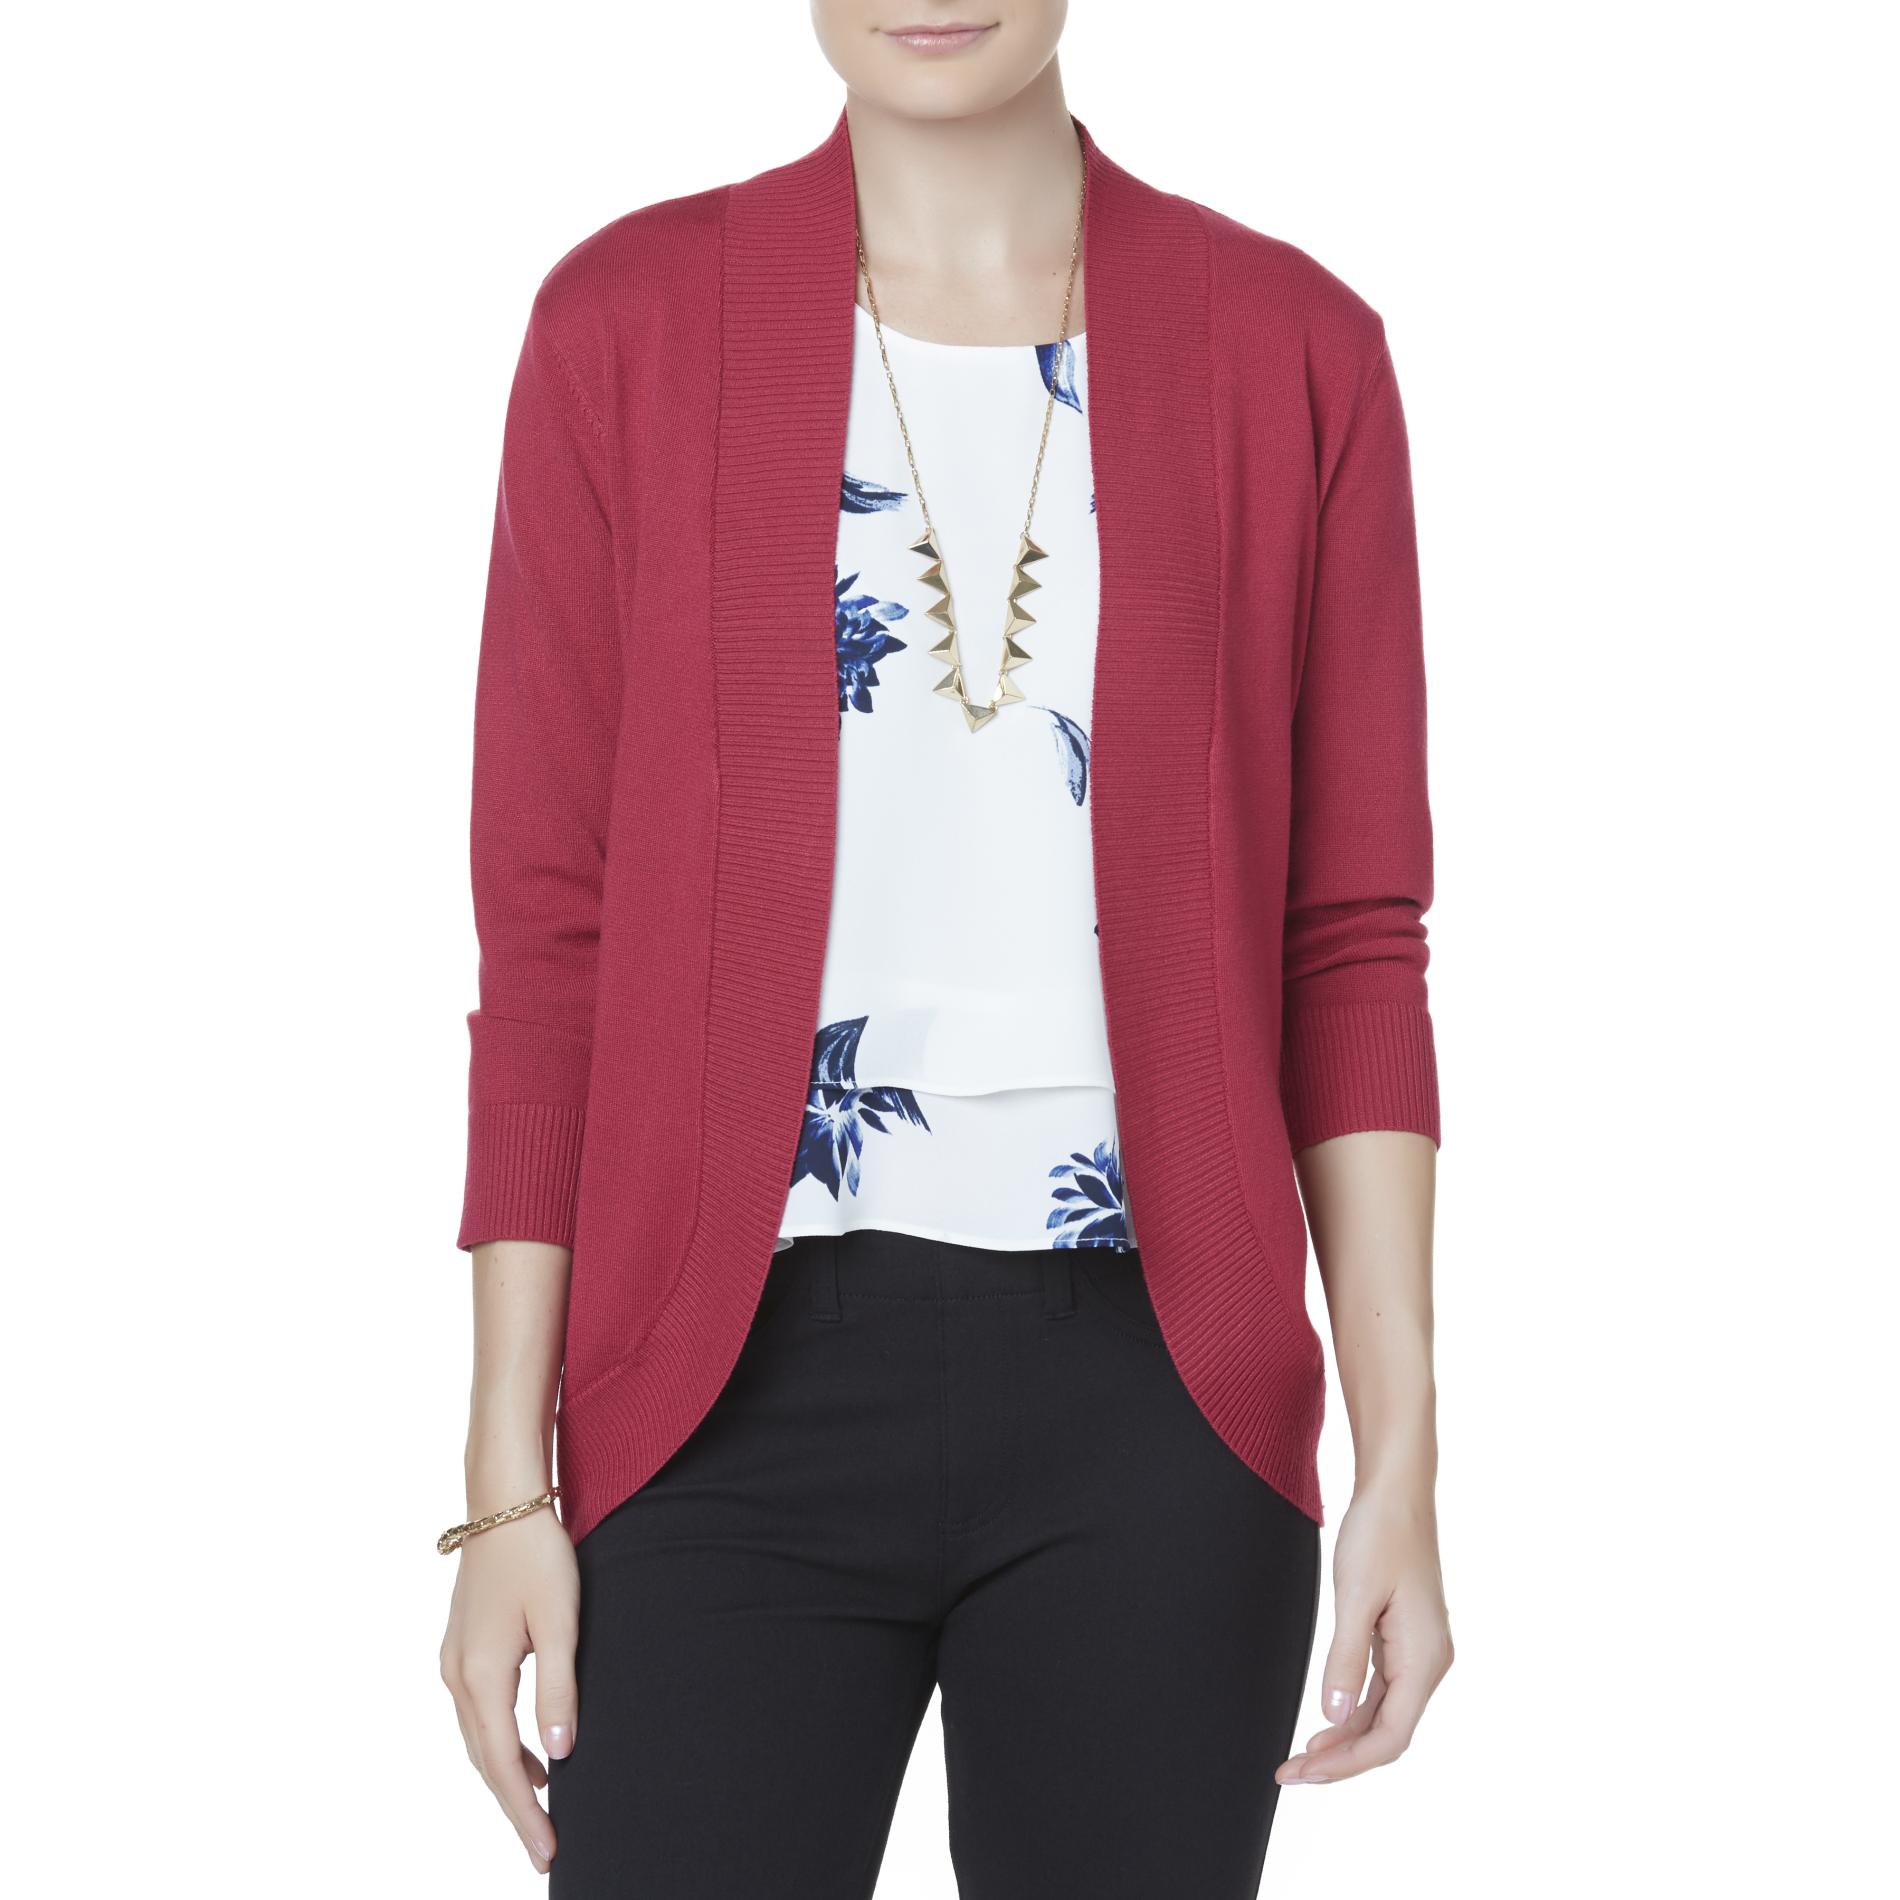 Simply Styled Women's Open-Front Cardigan